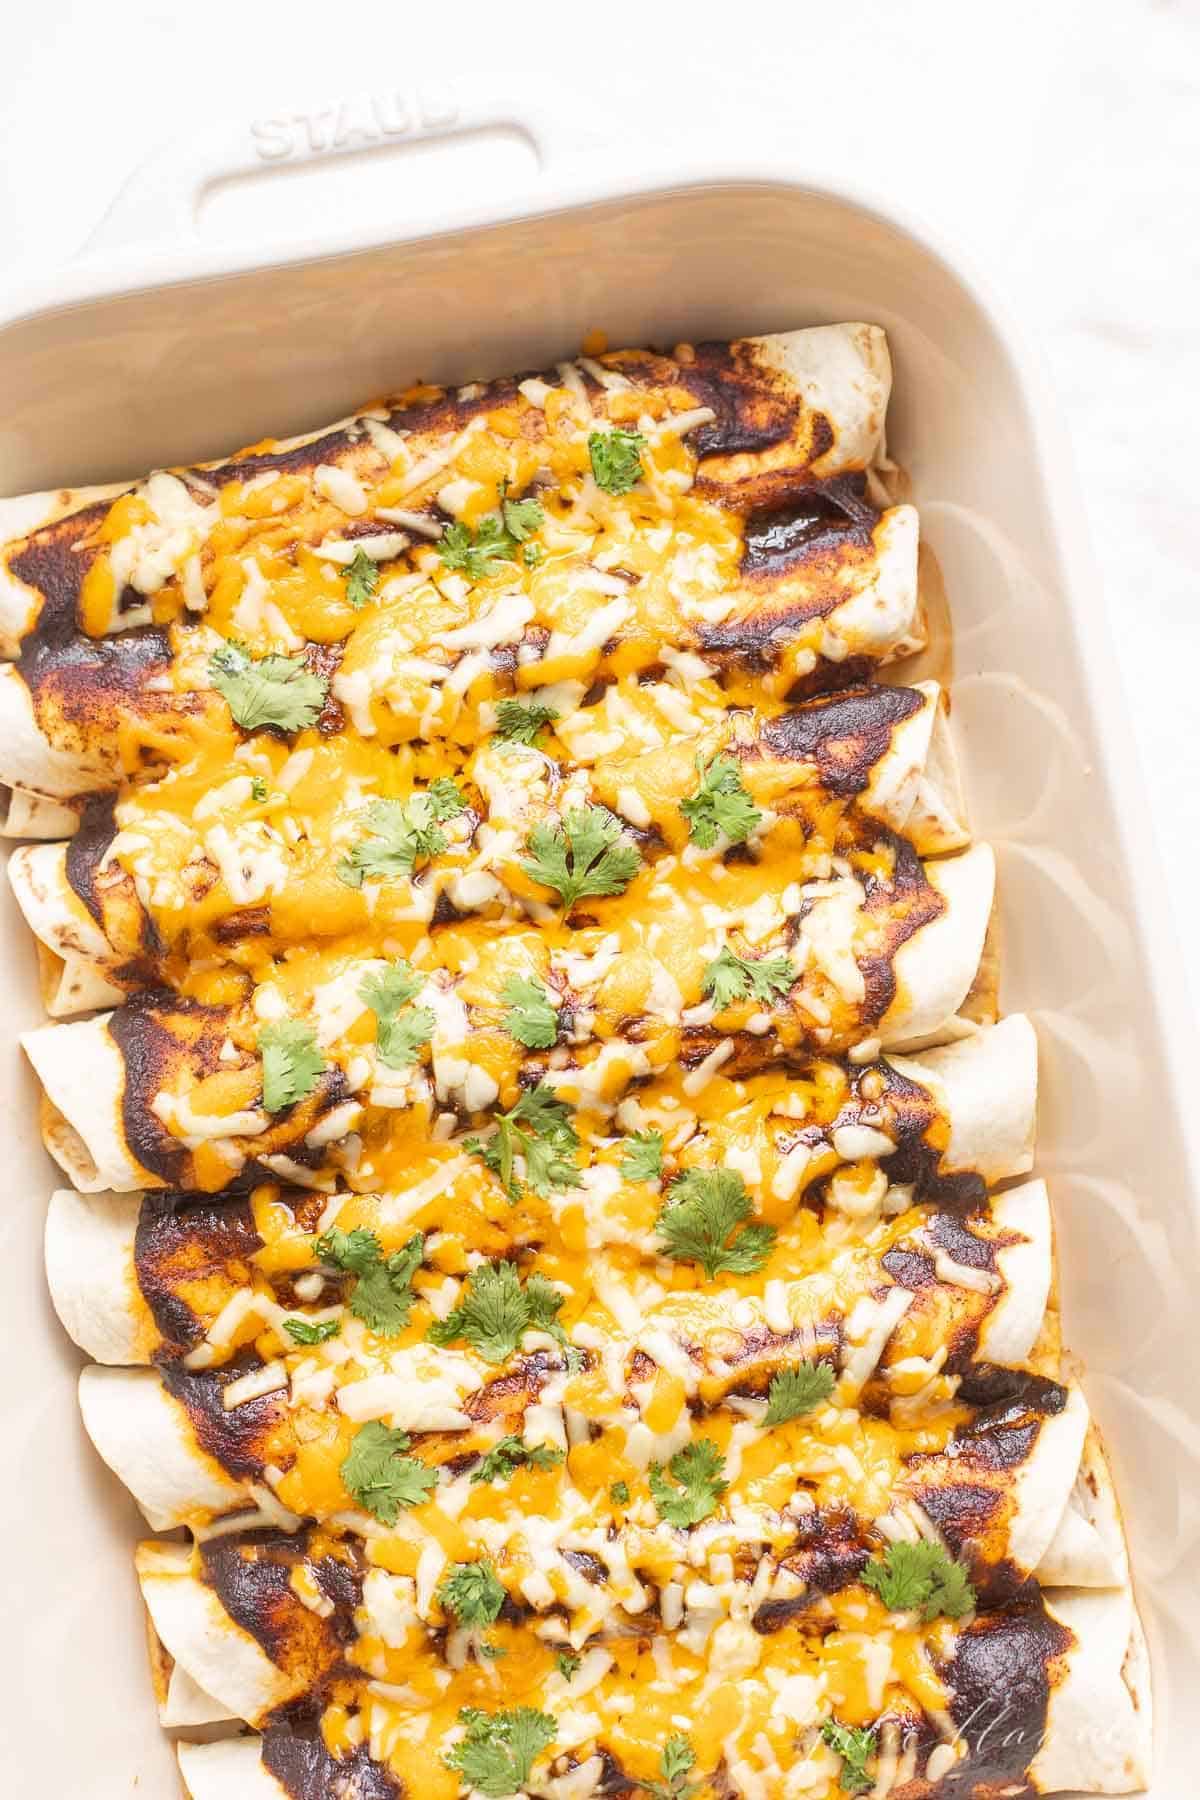 A ground beef enchilada recipe in a white baking dish.